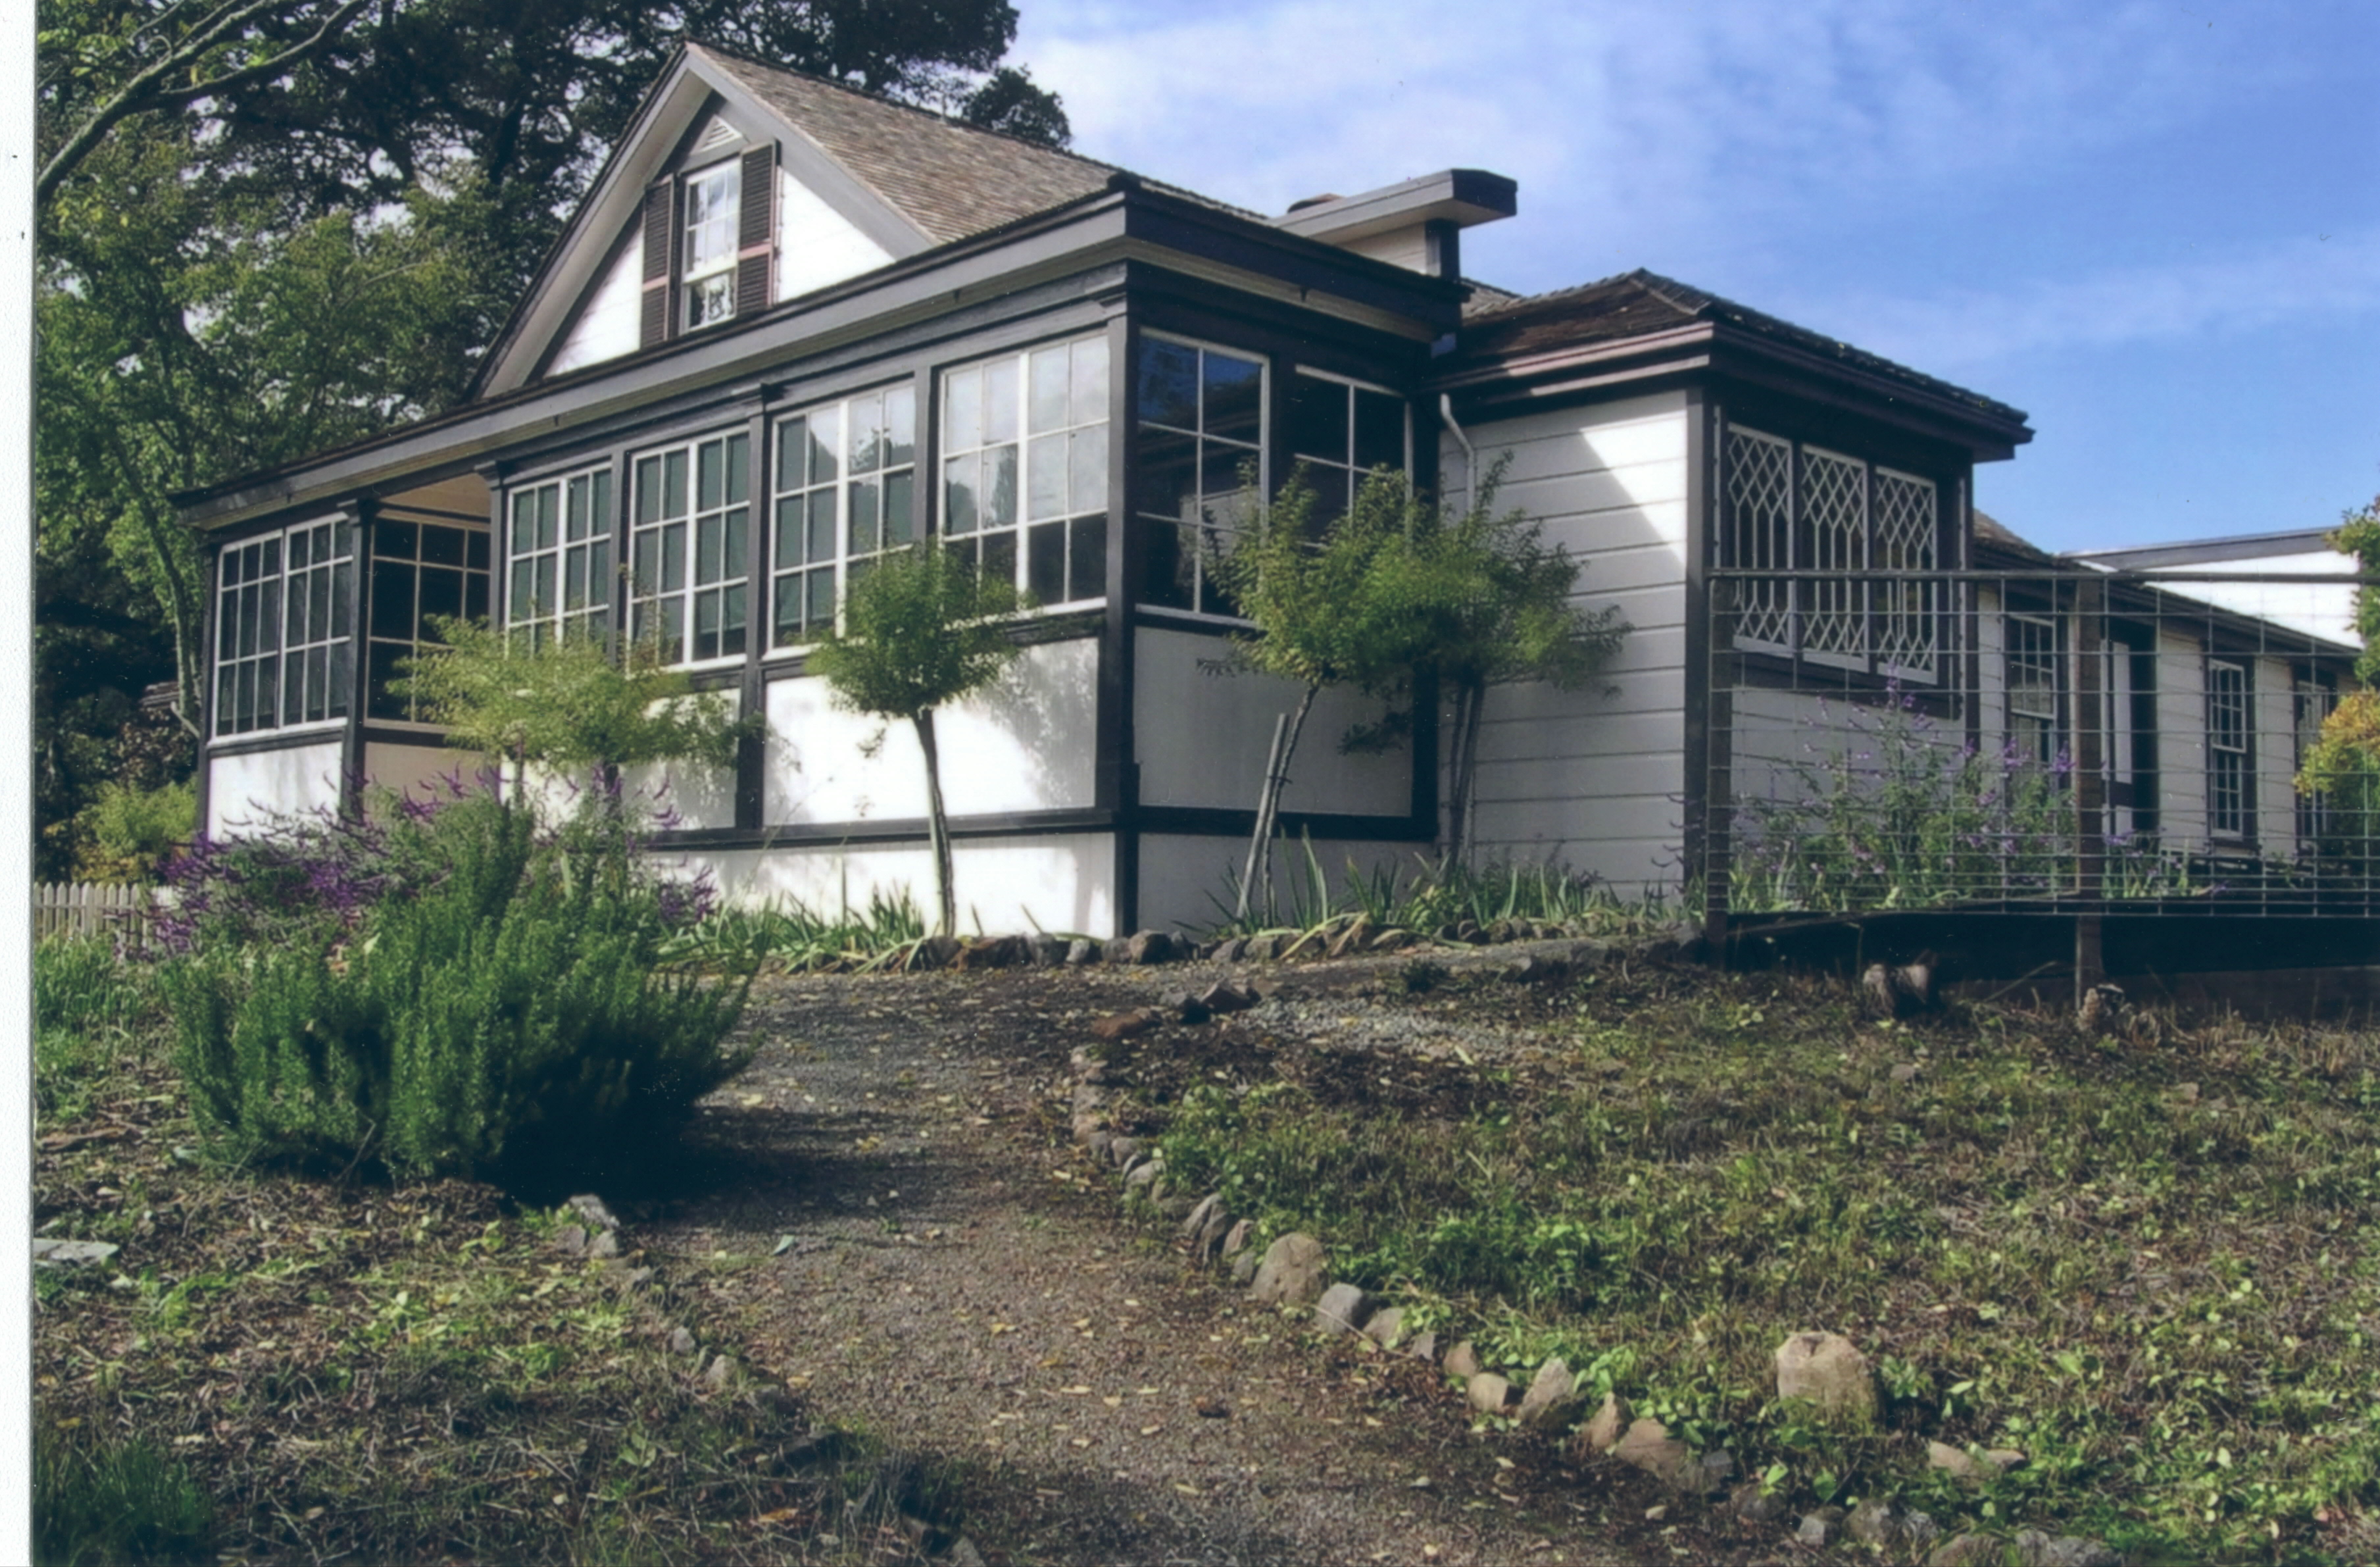 The old Winery Cottage, where Jack London died (in the left sleeping porch) on November 22, 1916. 